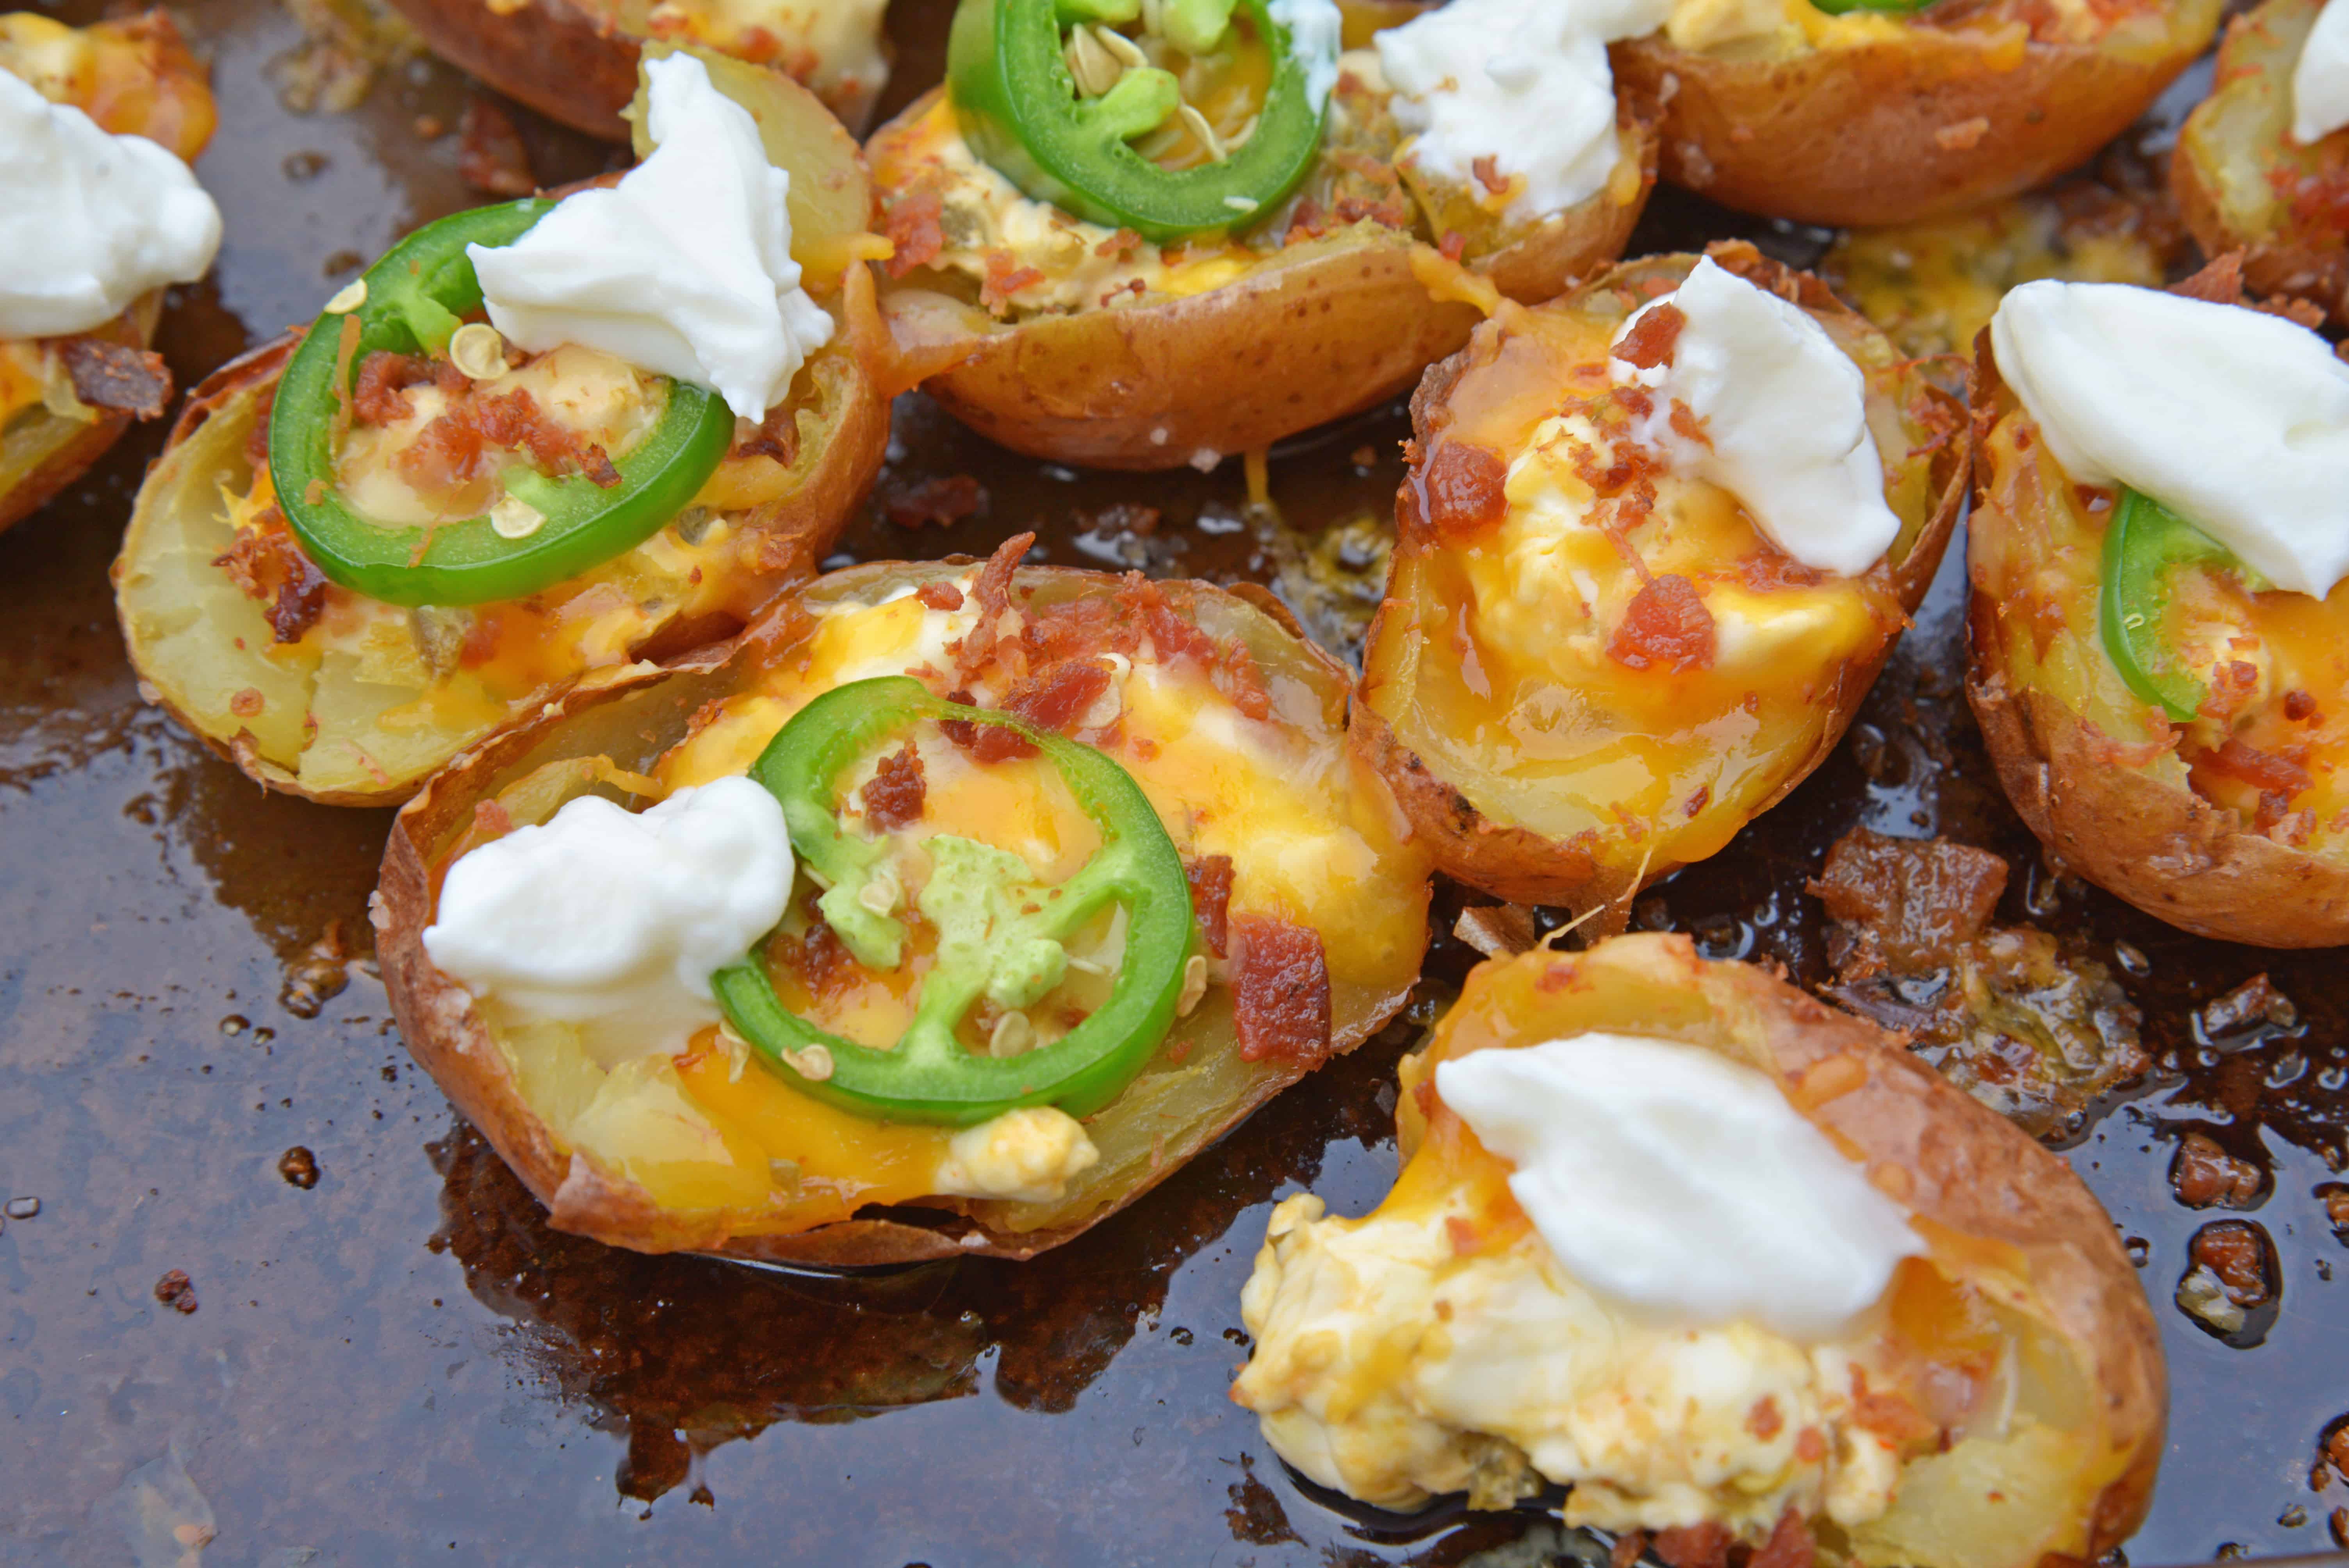 Jalapeno Popper Potato Skins are bite-sized potatoes filled with 3 types of cheese, fresh jalapenos, bacon and cooled off with sour cream. Perfect for a snack or party appetizer! #potatoskins #jalapenopoppers www.savoryexperiments.com